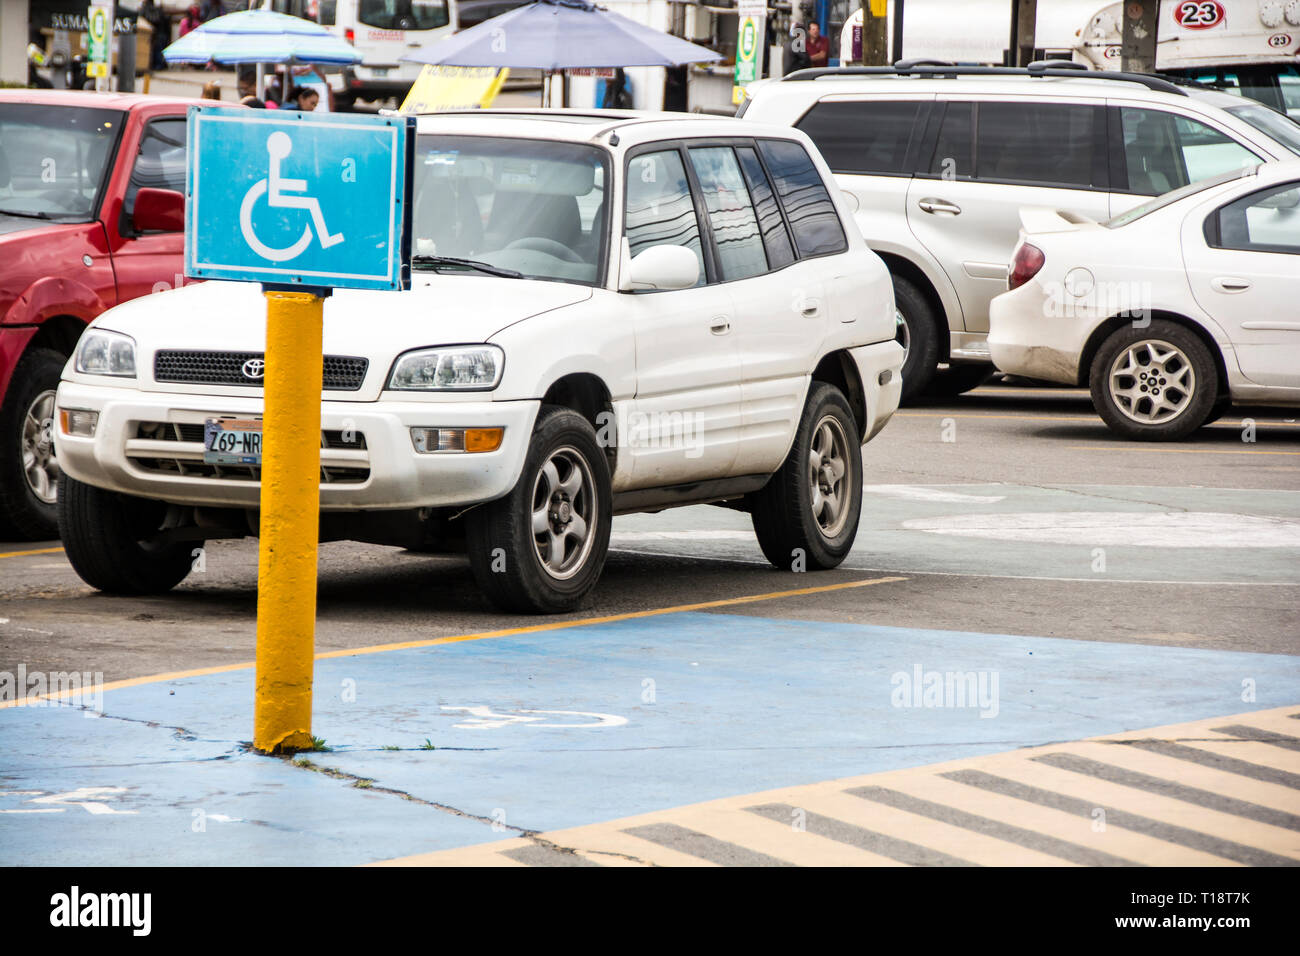 Handicapped parking space in a parking lot in the city of Ensenada, Mexico. Stock Photo